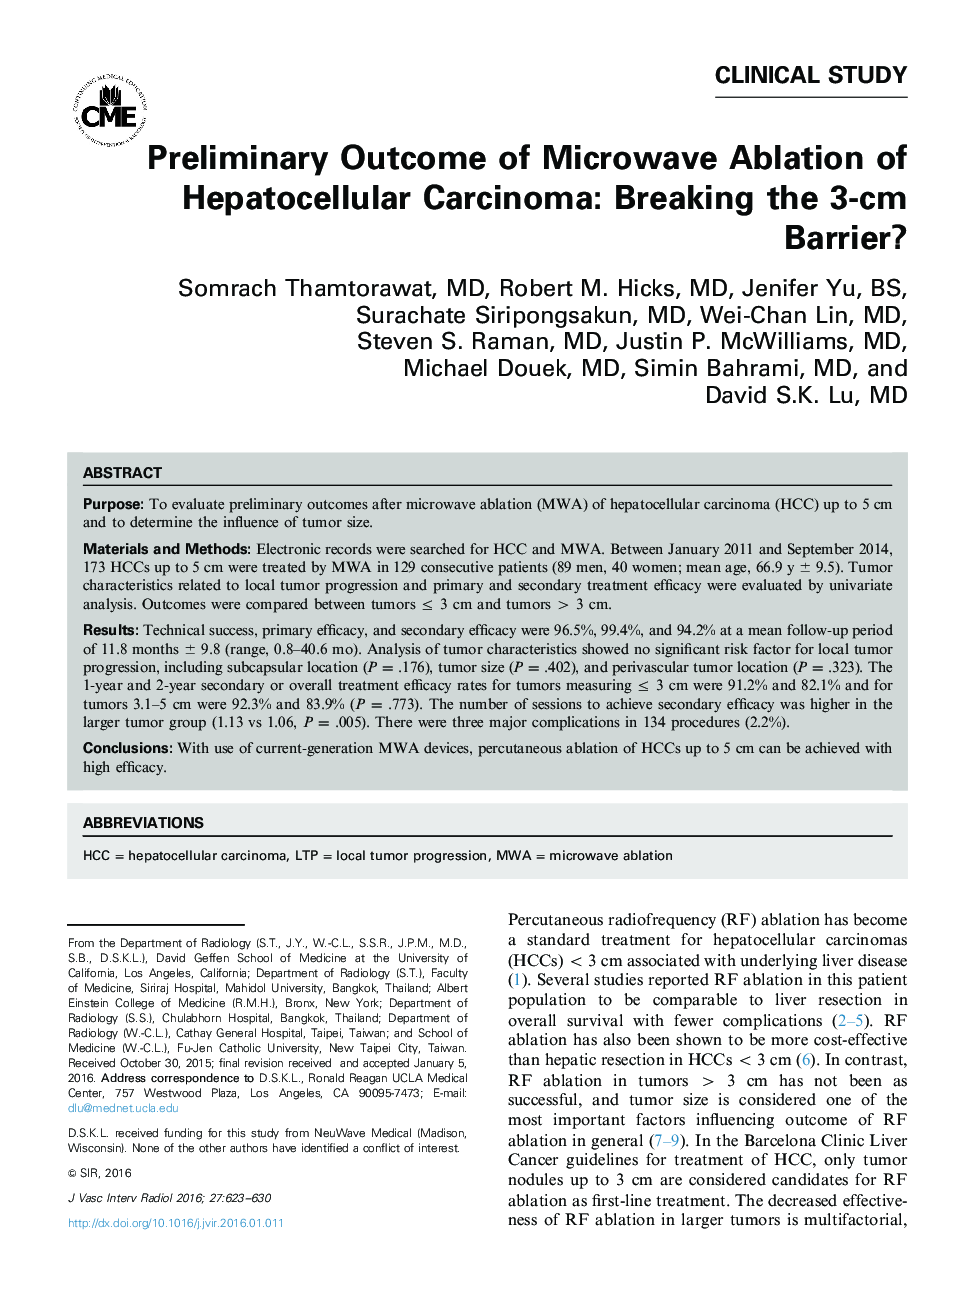 Preliminary Outcome of Microwave Ablation of Hepatocellular Carcinoma: Breaking the 3-cm Barrier?